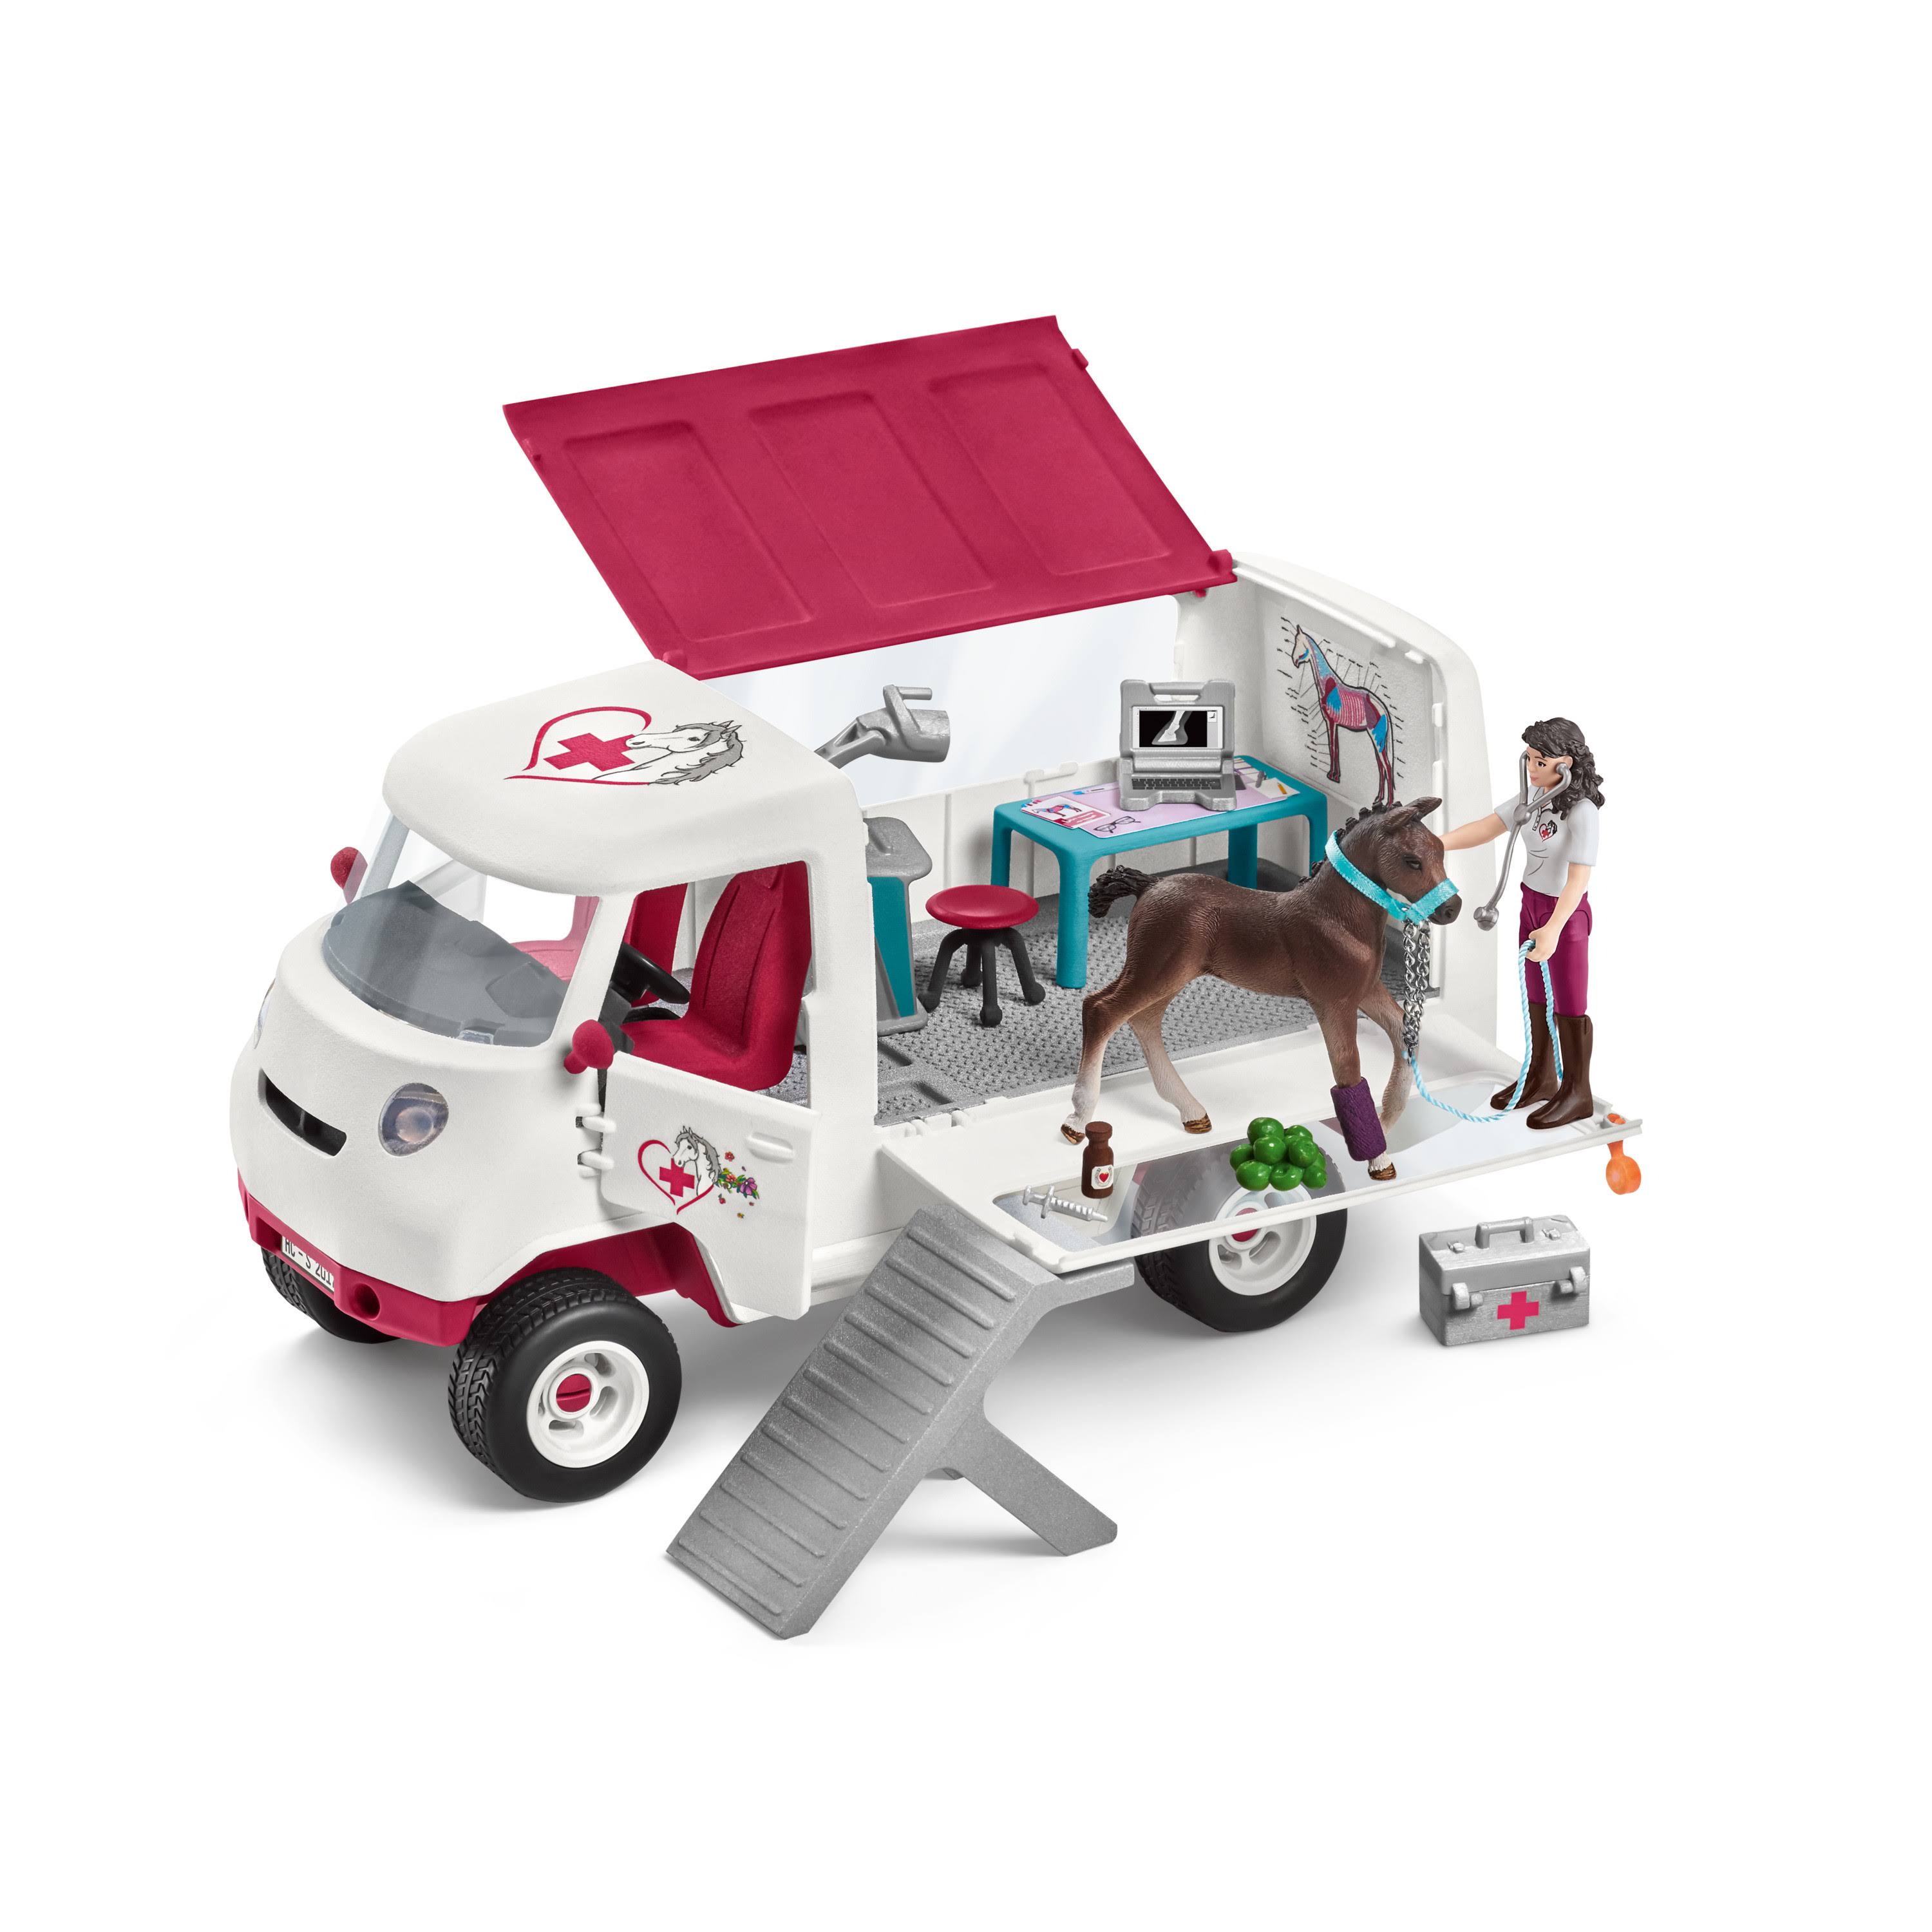 Schleich 42439 Mobile Vet with Hanoverian Foal (NEW)